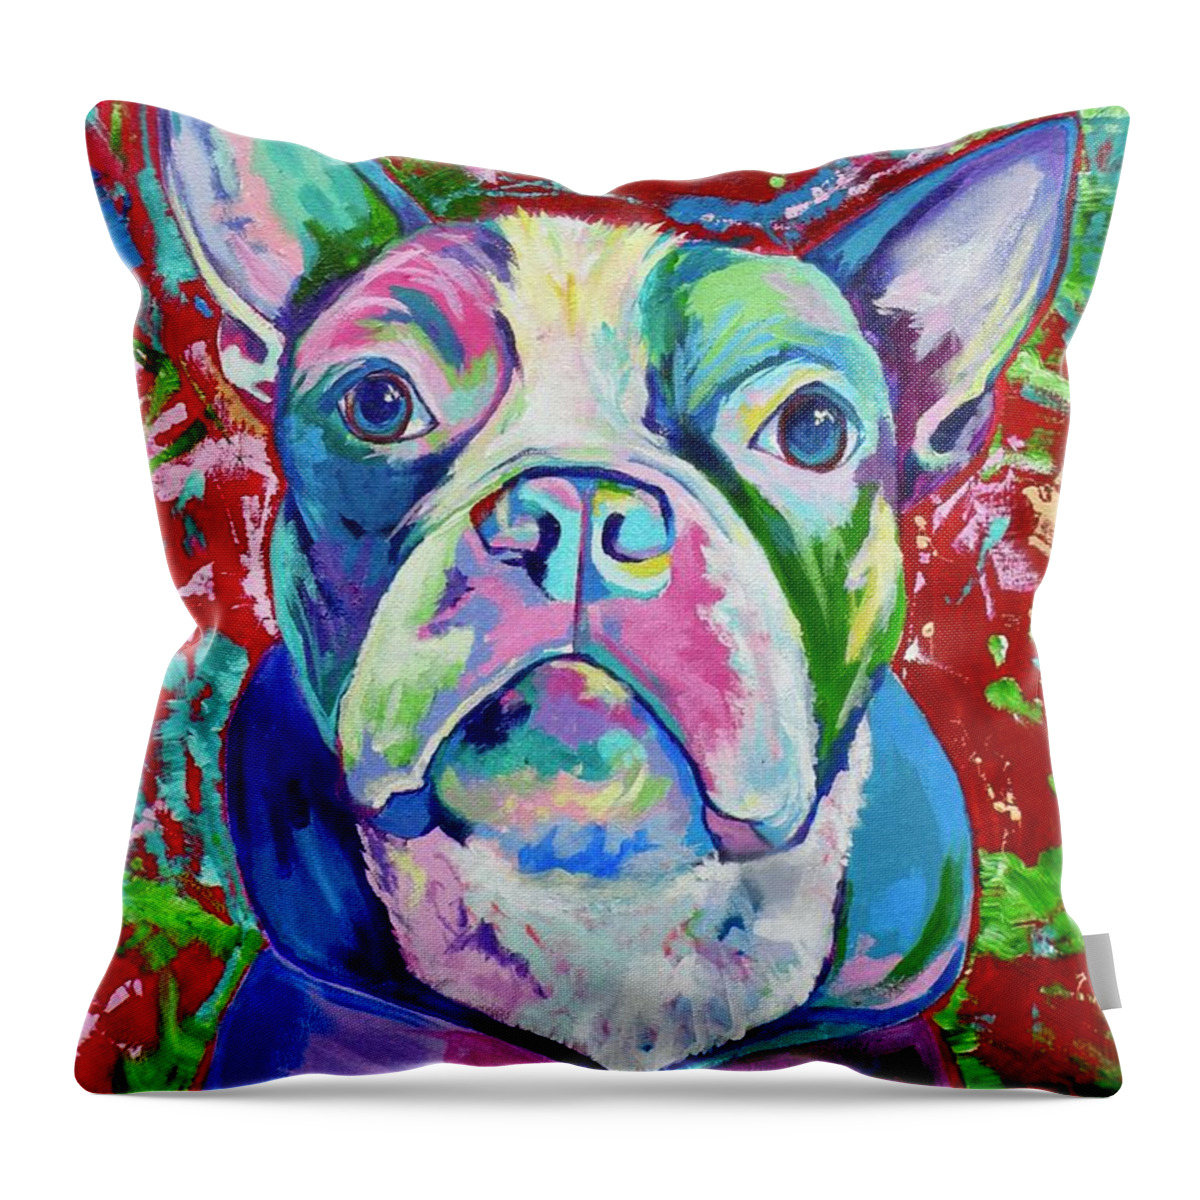  Throw Pillow featuring the painting Boston Terrier by Janice Westfall